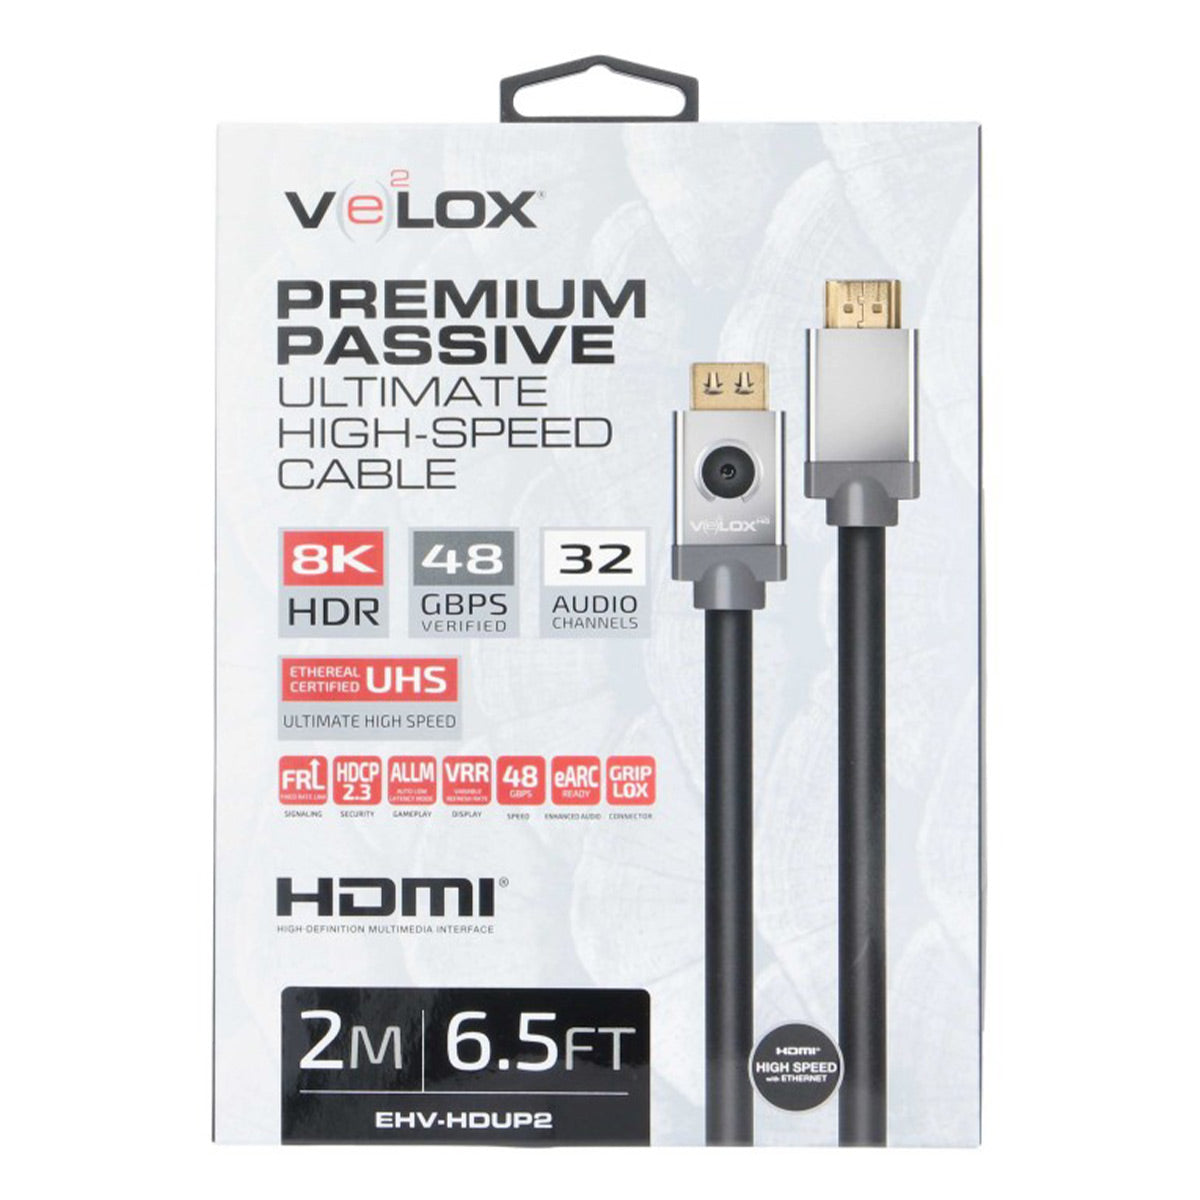 Velox Passive 48Gbps HDMI Cable - 6.56 ft. (2m)